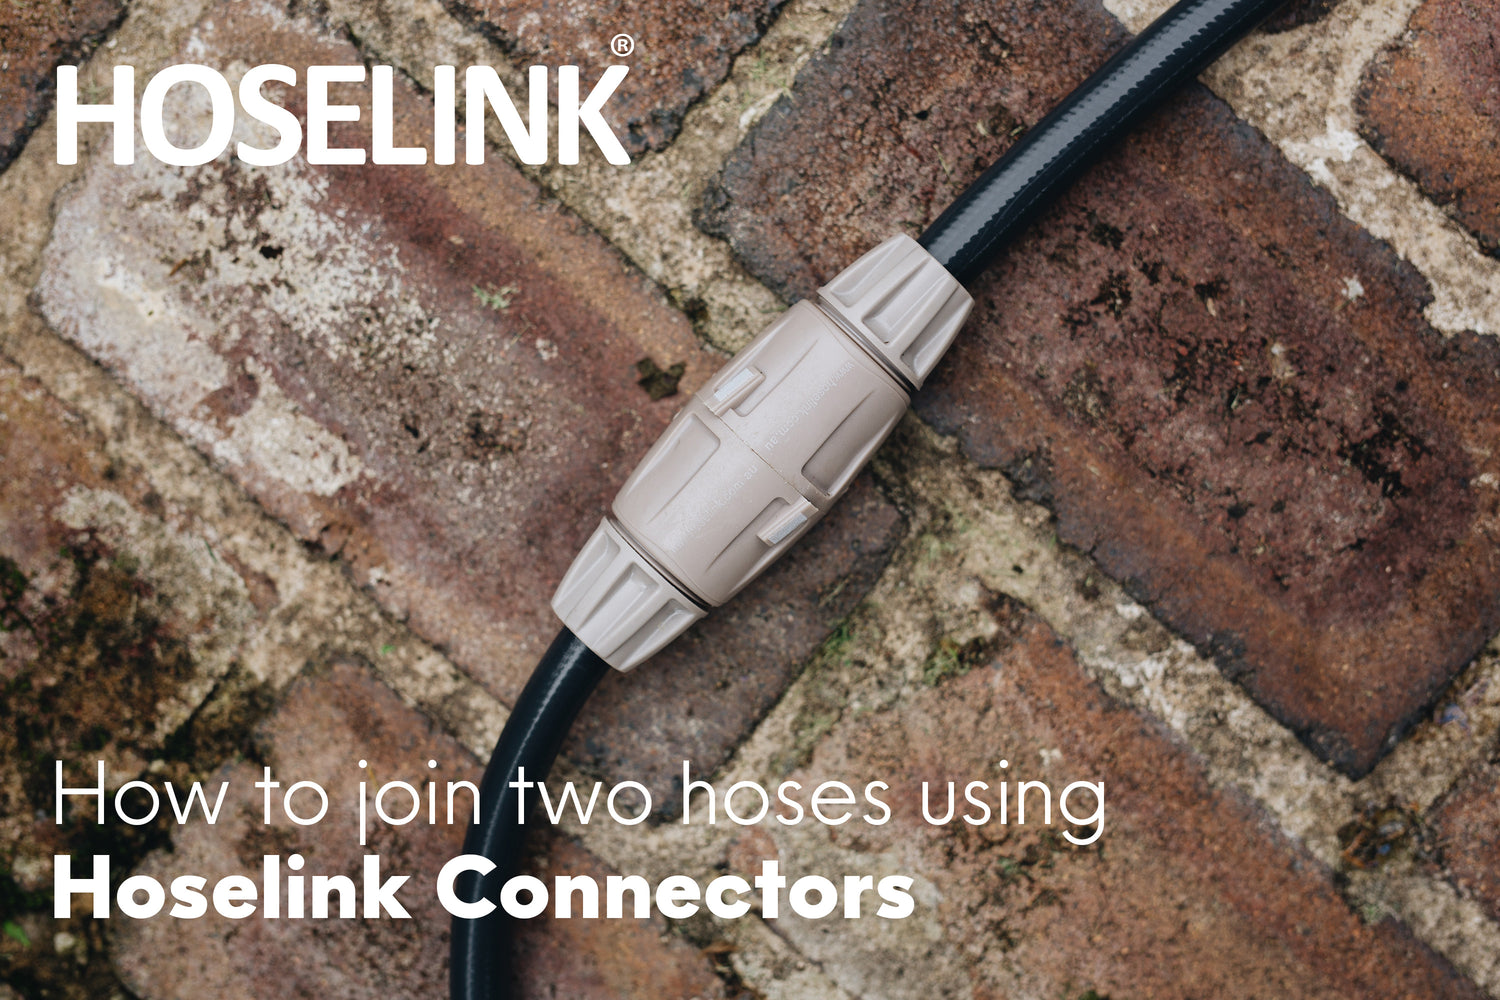 How to join two hoses using Hoselink connectors